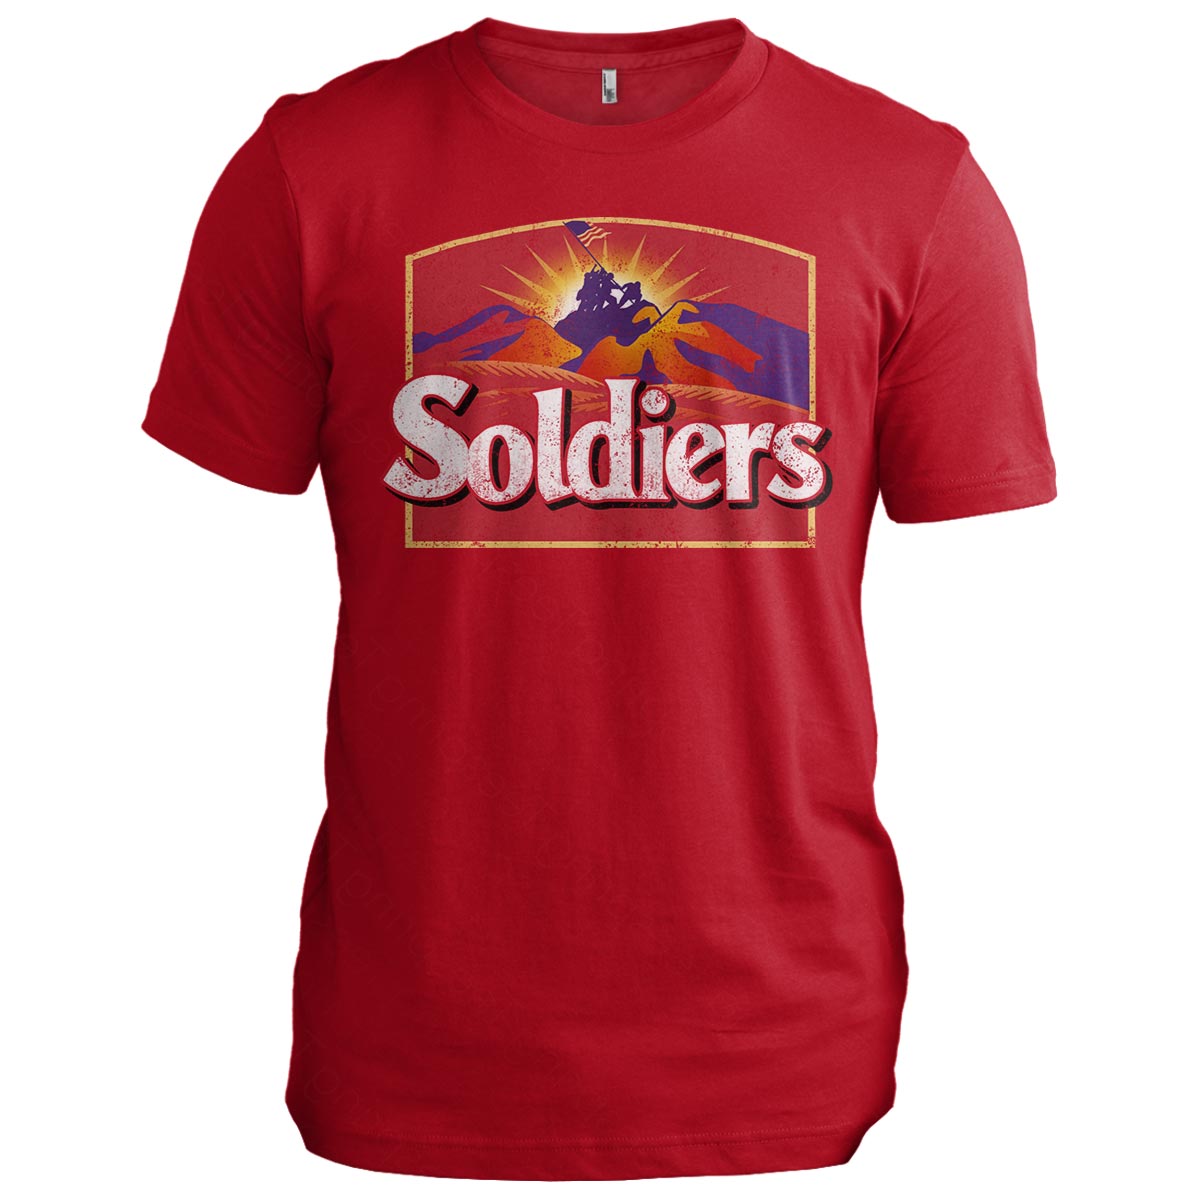 Soldiers: The Best Part of Waking Up